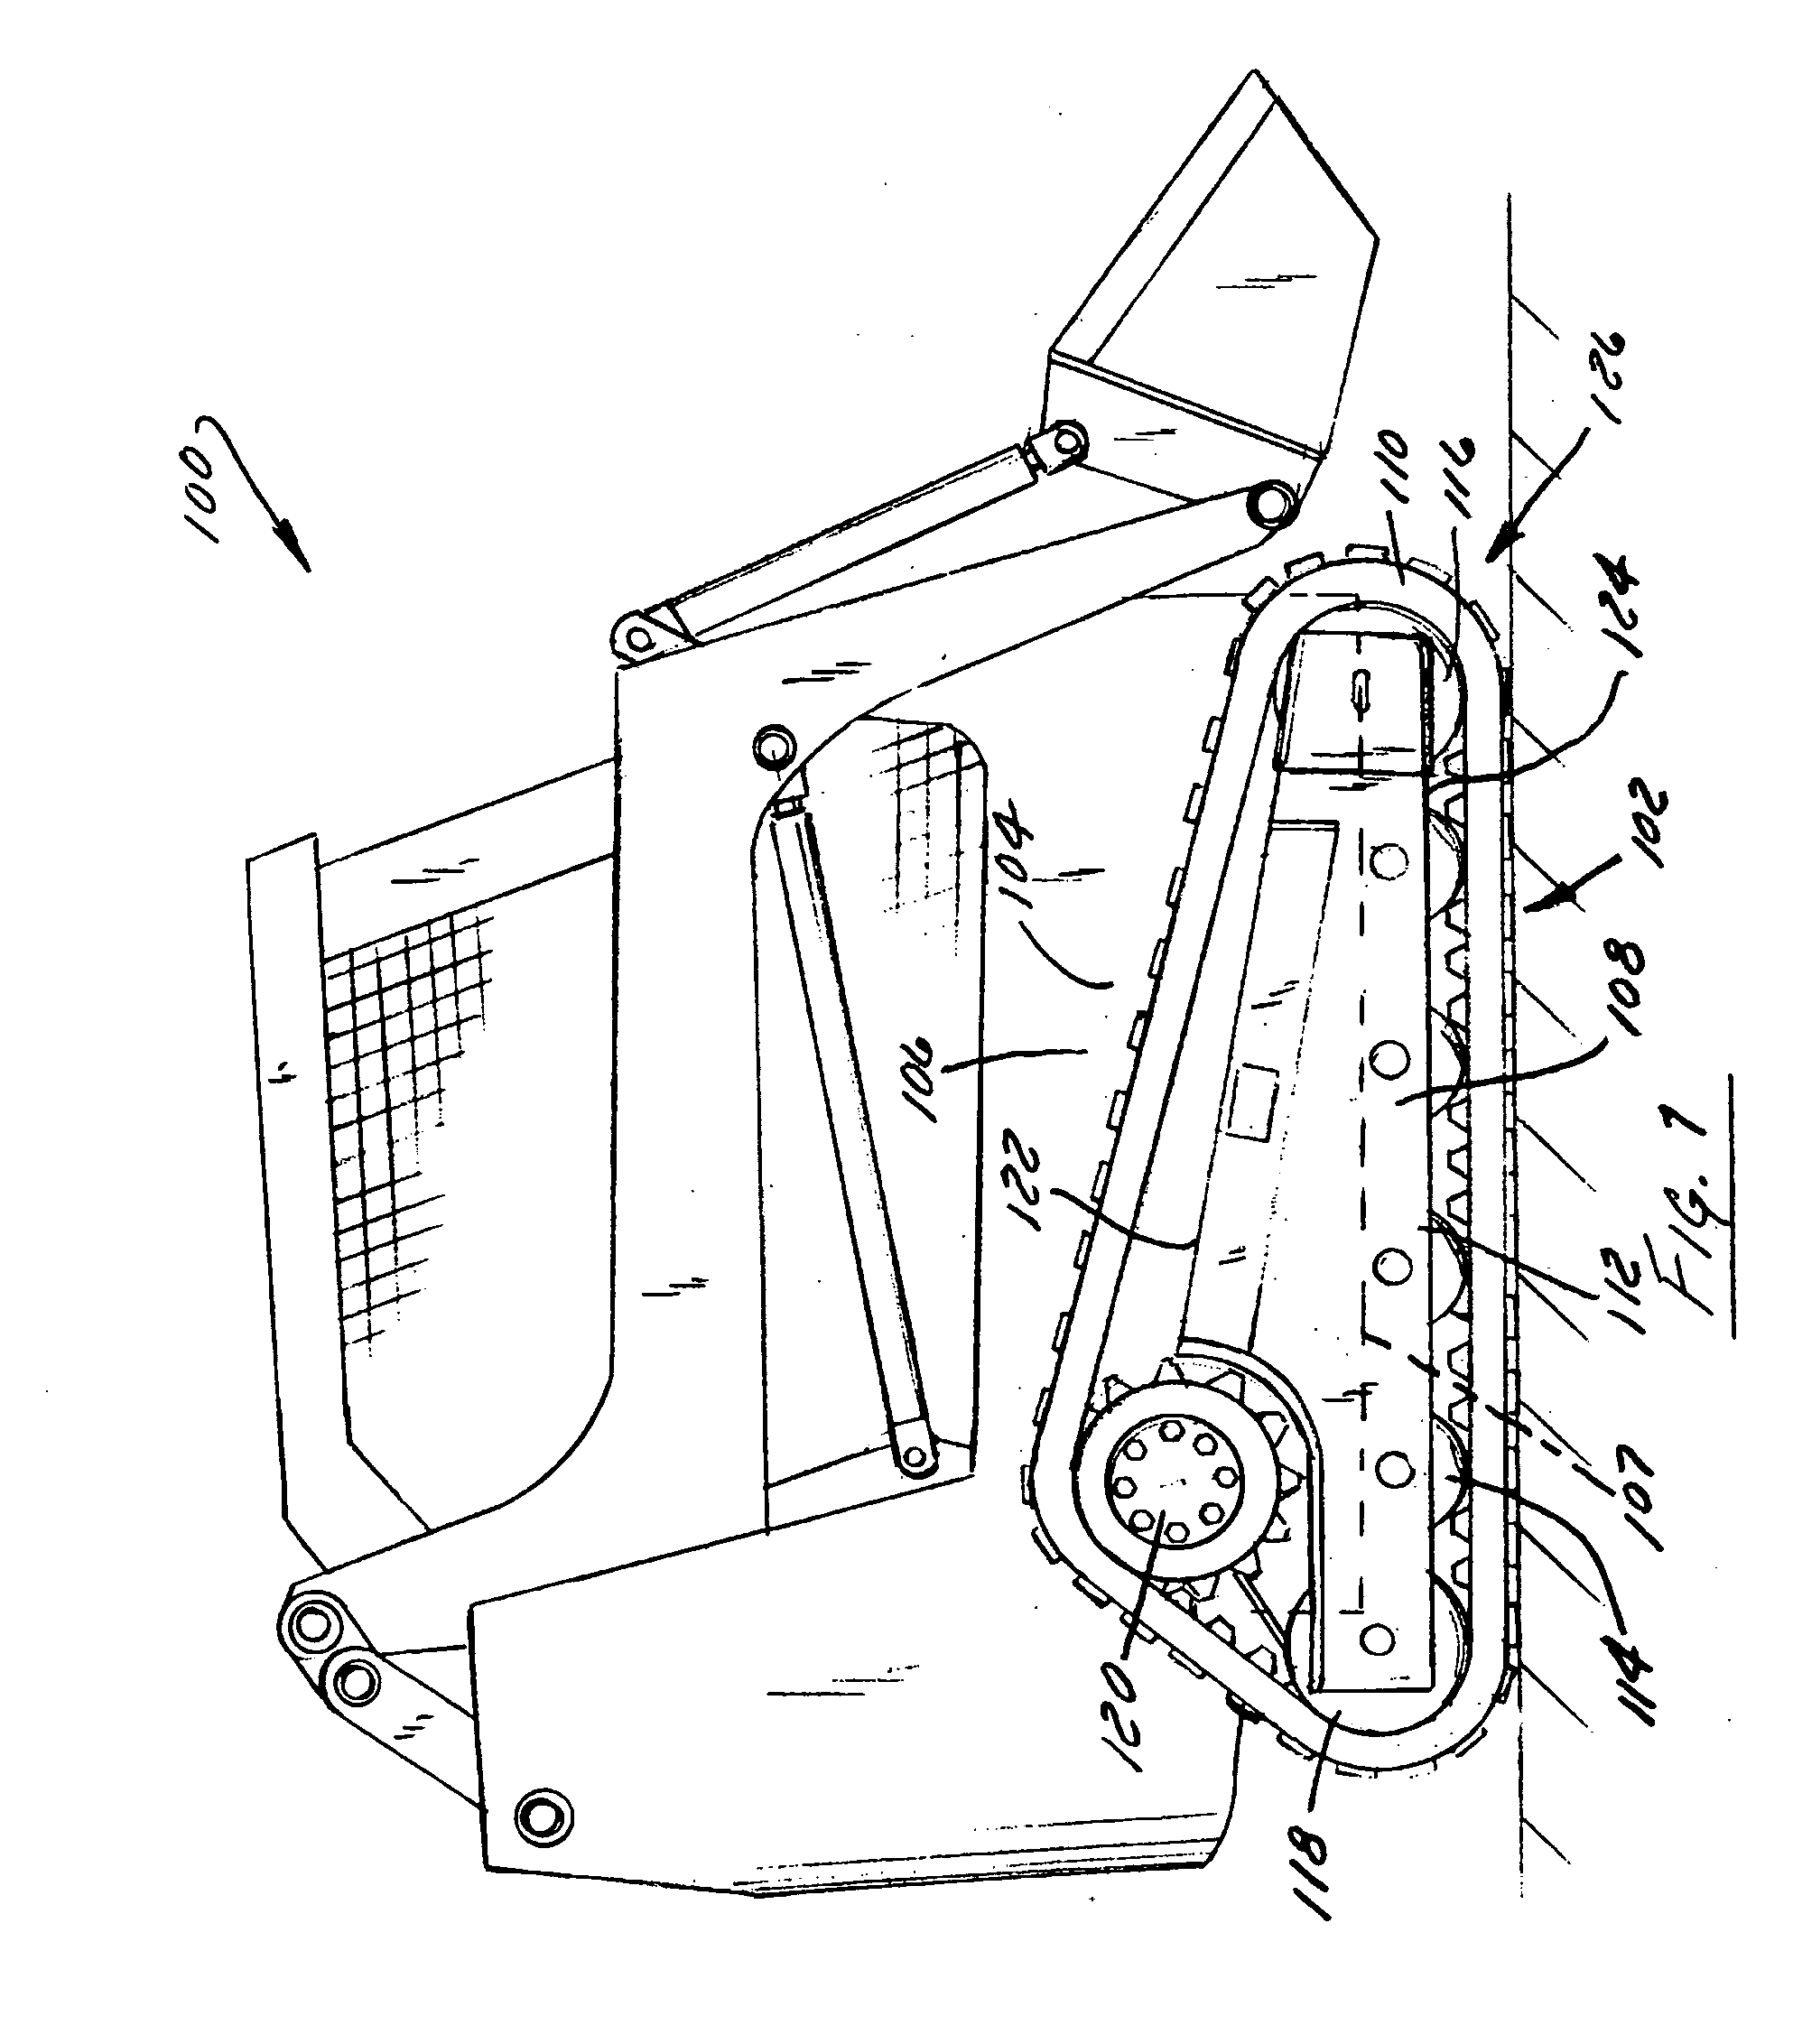 Tracked suspension beam assembly